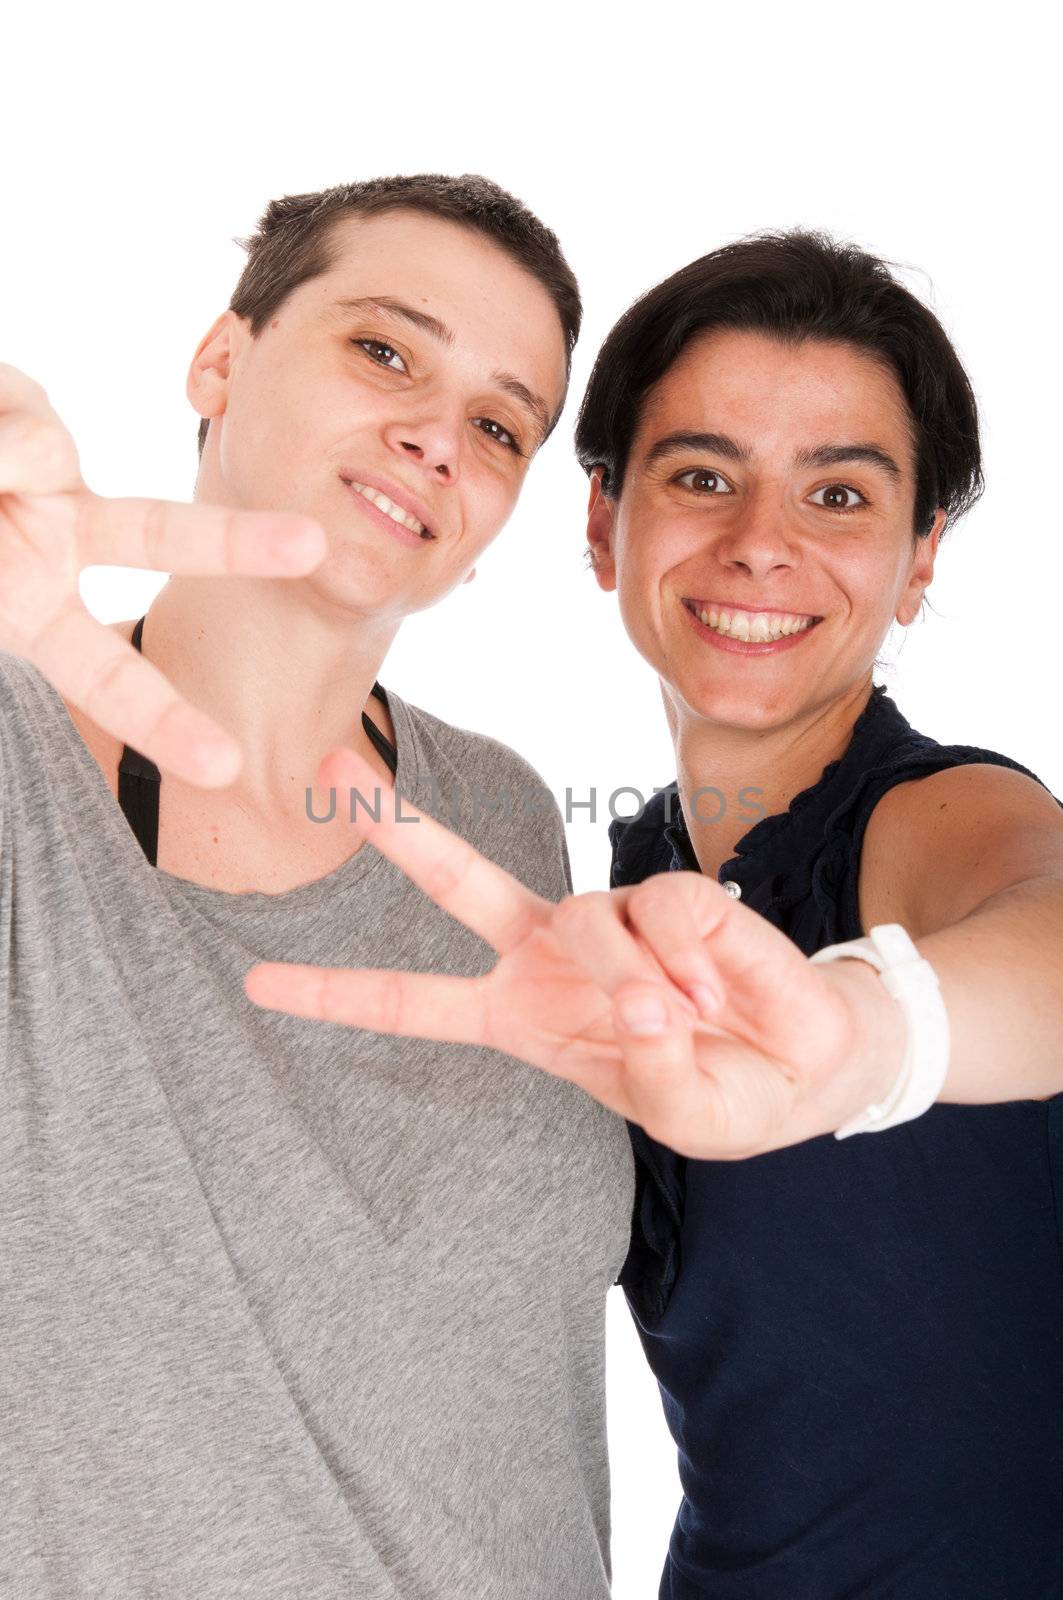 Sisters showing victory sign by luissantos84